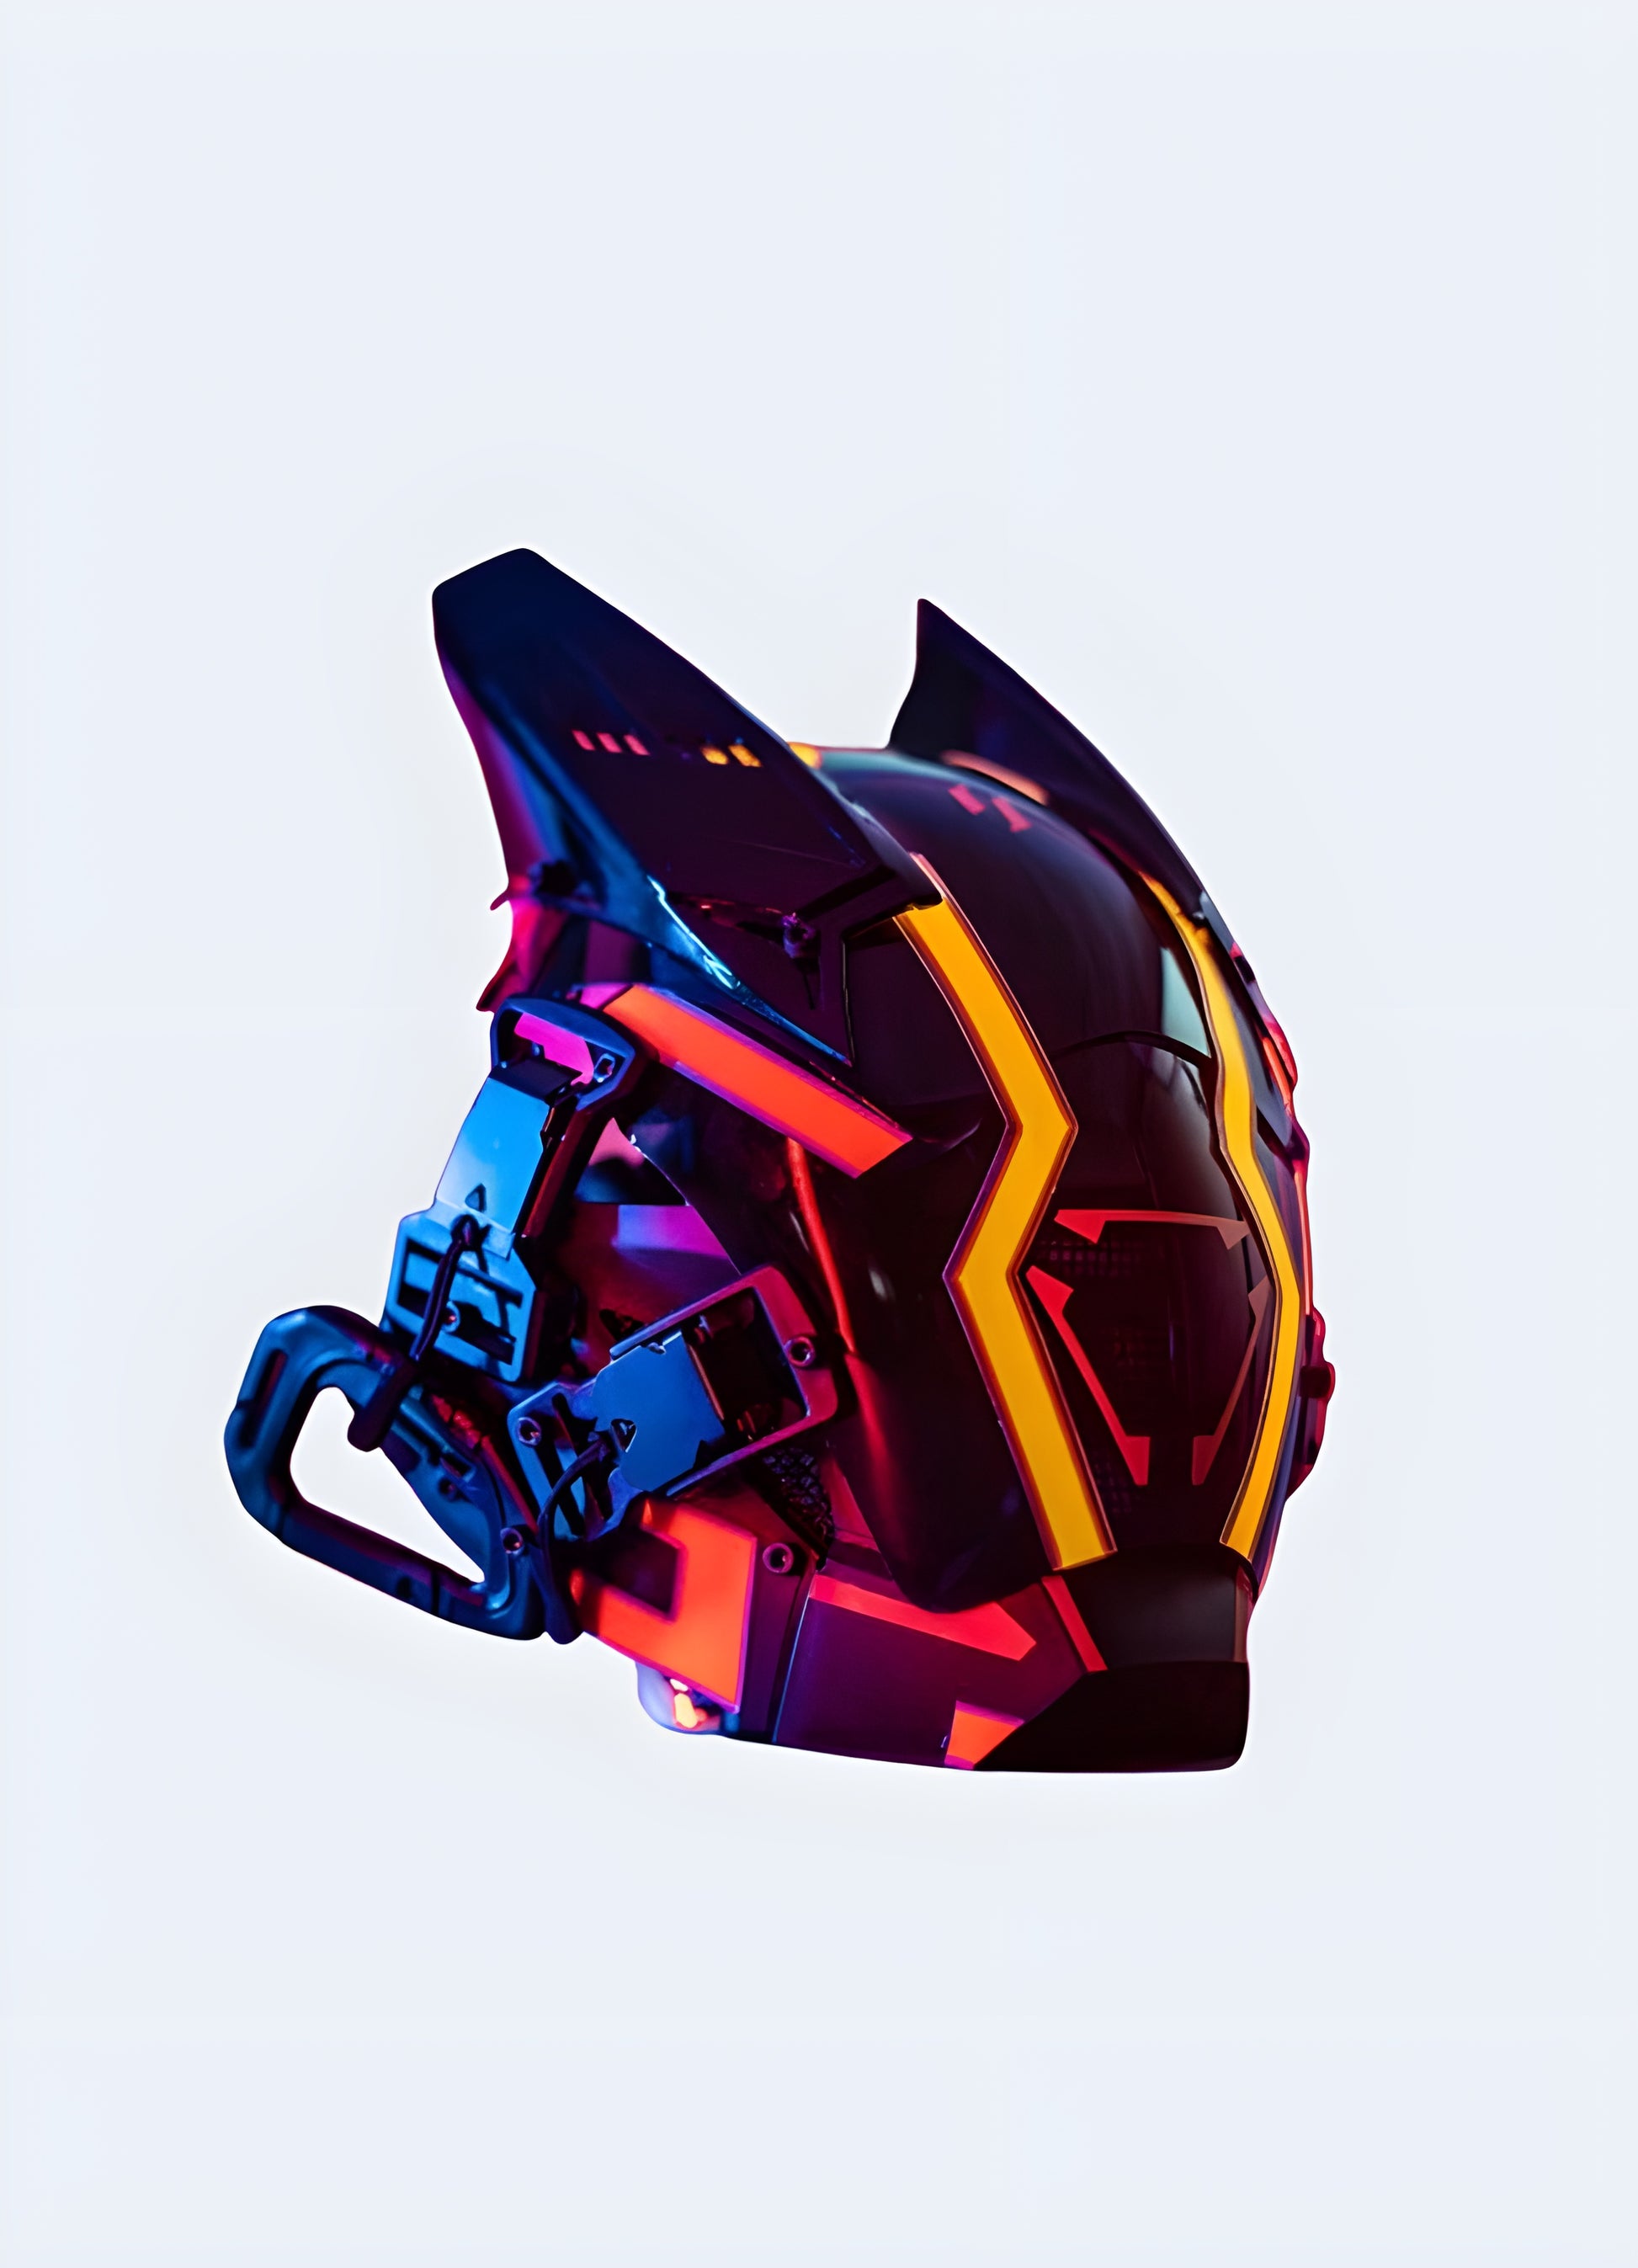 The helmet is made from high-quality materials, so you can be sure that it will last.